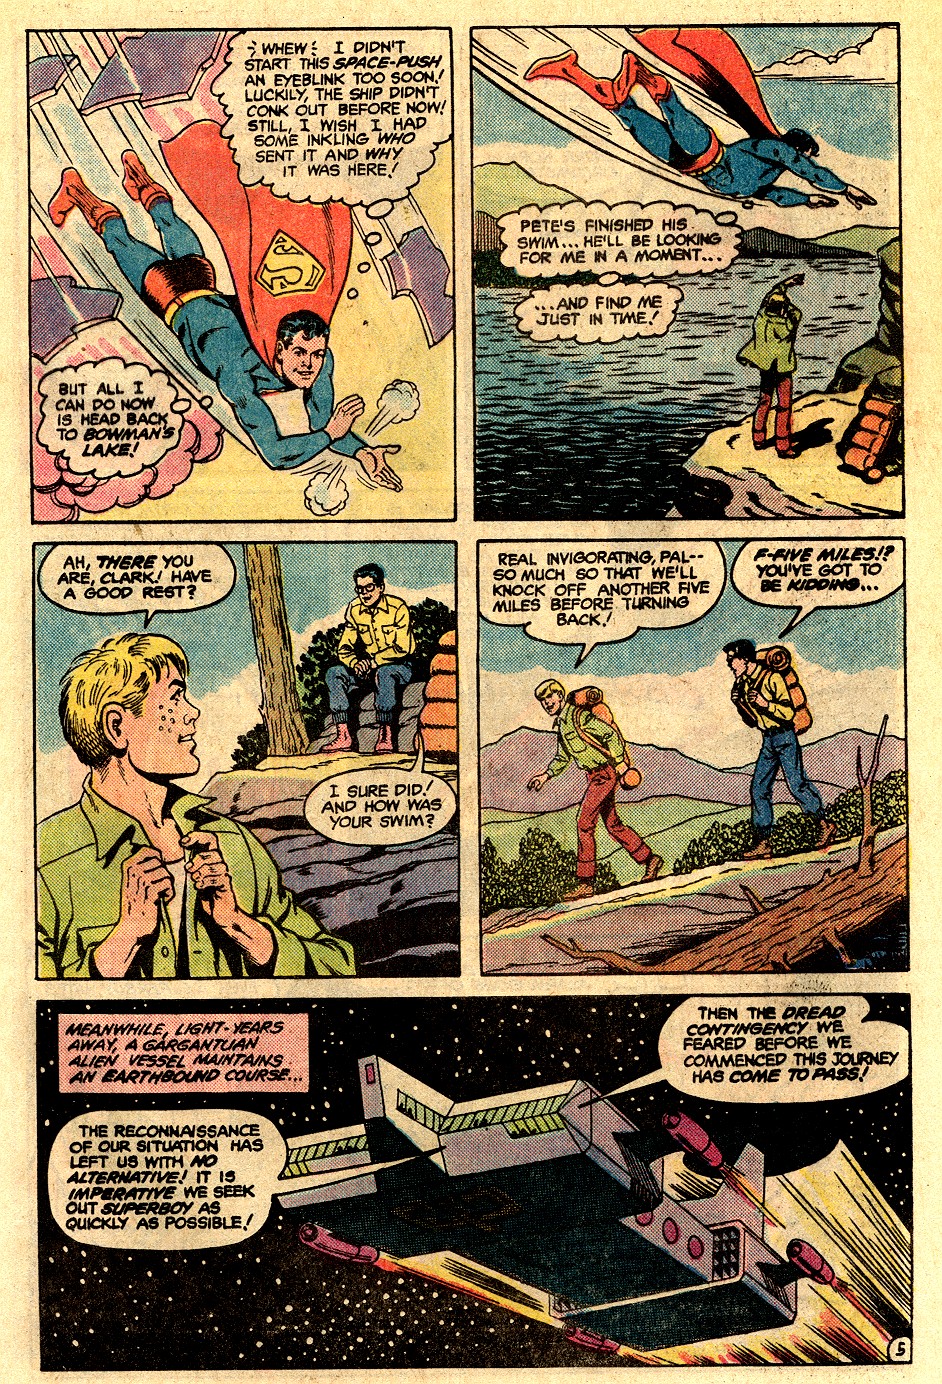 The New Adventures of Superboy 32 Page 8